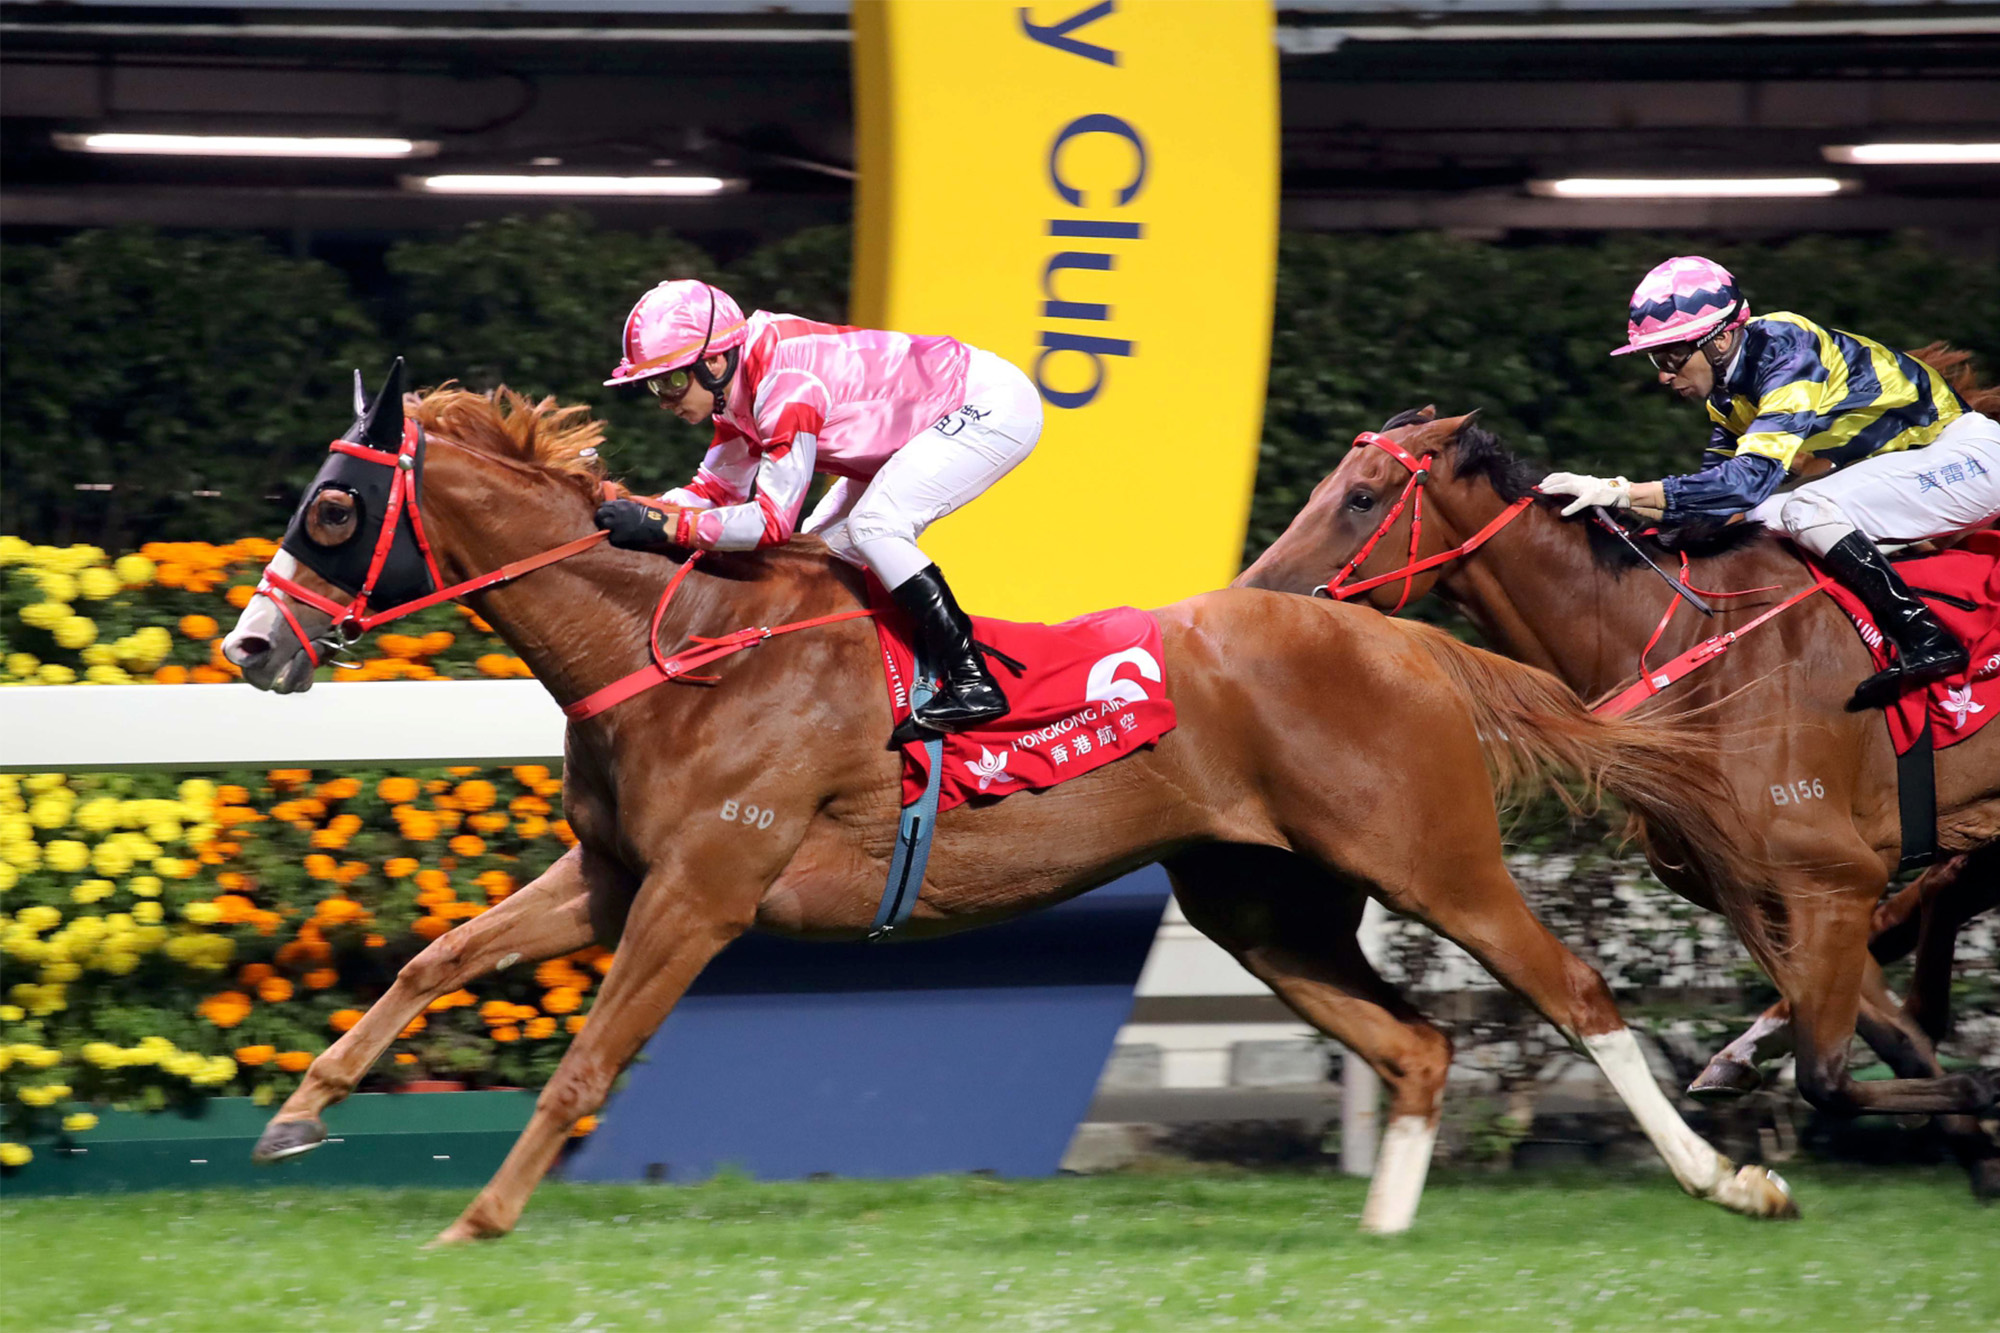 Simply Brilliant – HK : Talented son of Frankel with six Hong Kong wins from 25 starts; 2019 G3 January Cup score to his name as well, finished third in 2019 FWD Champions Mile.